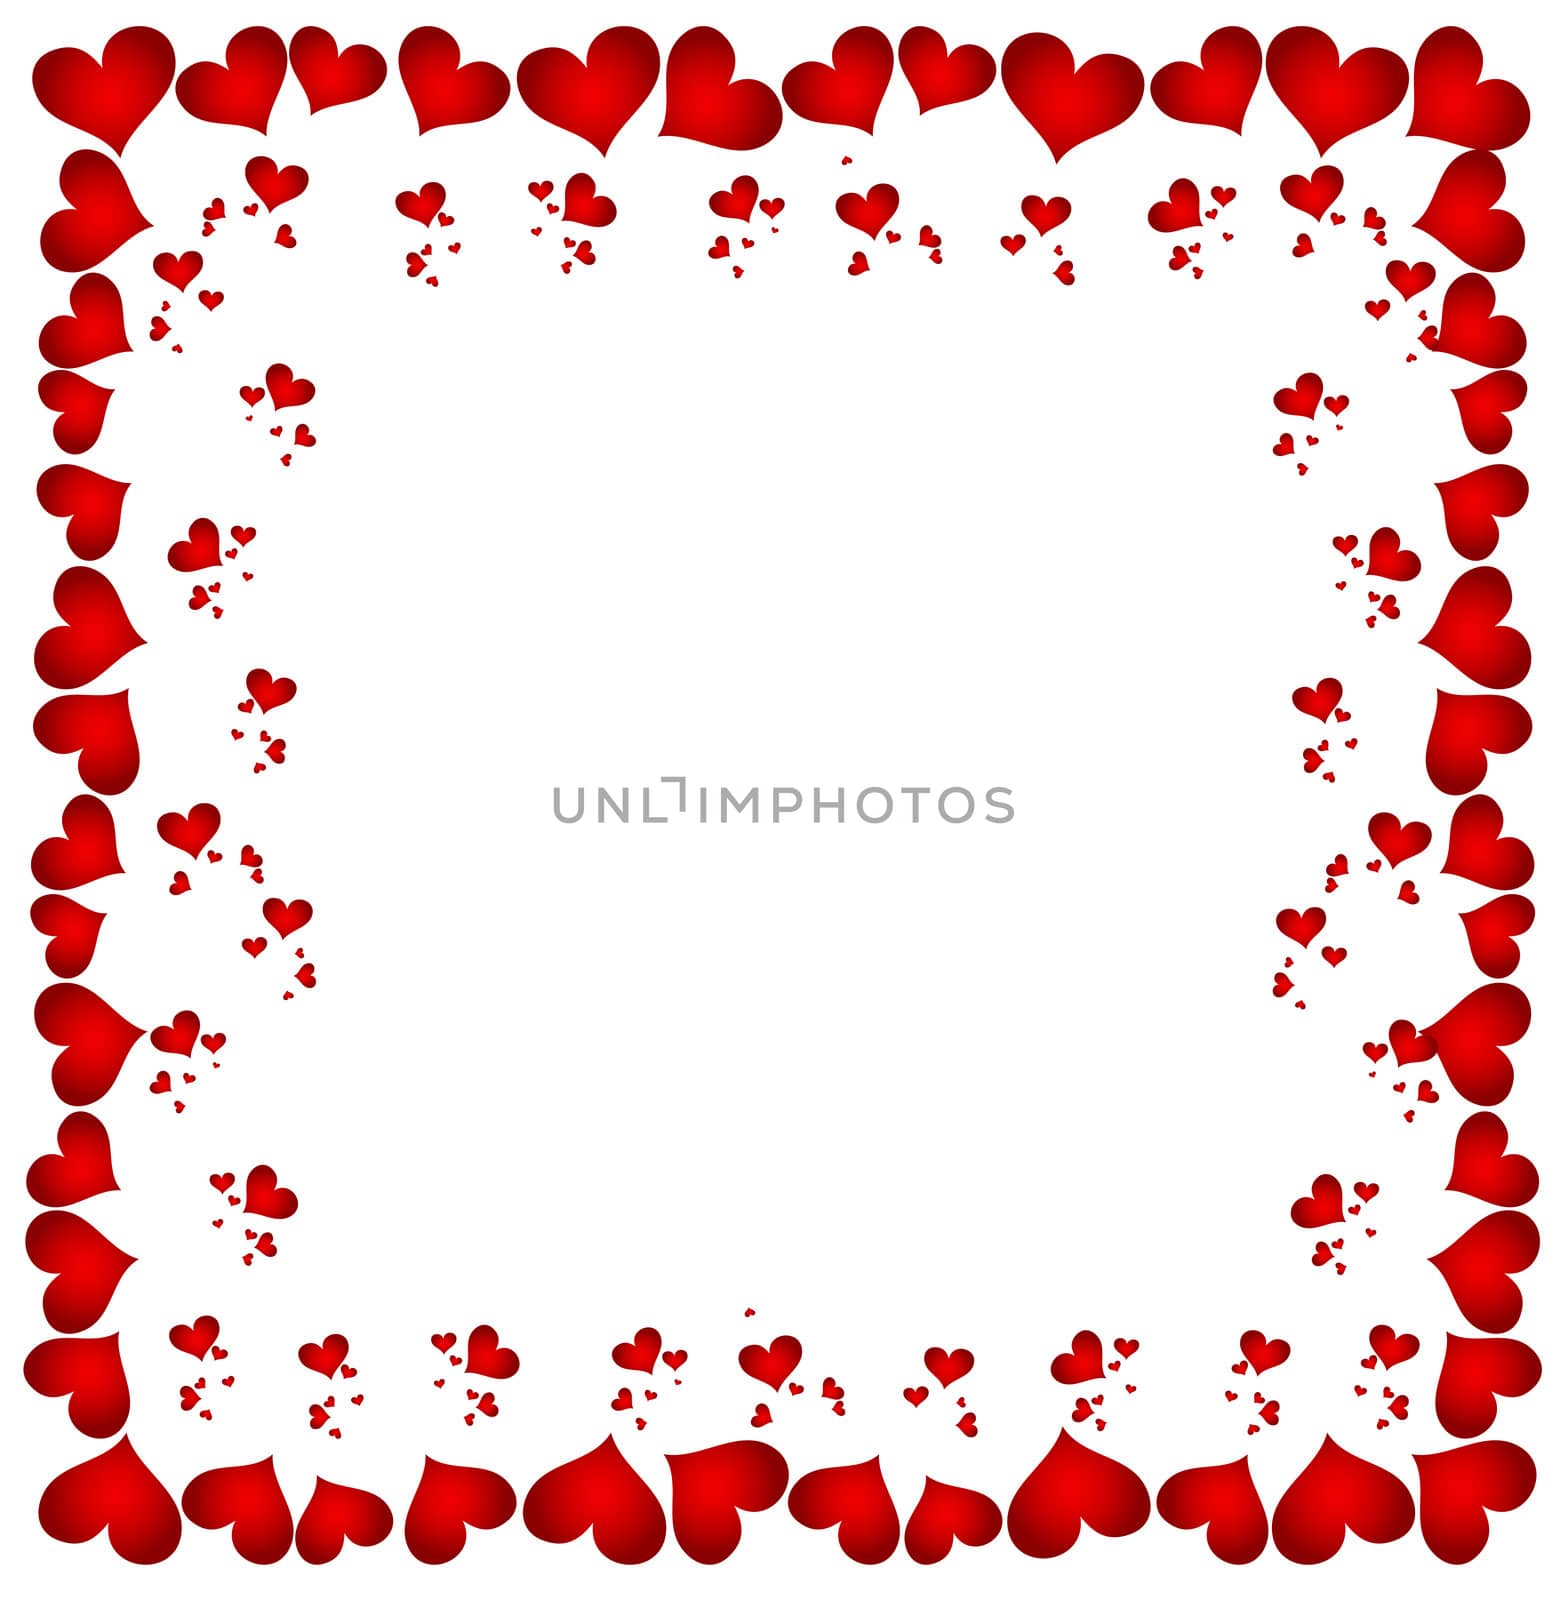 Heart Frame by peromarketing